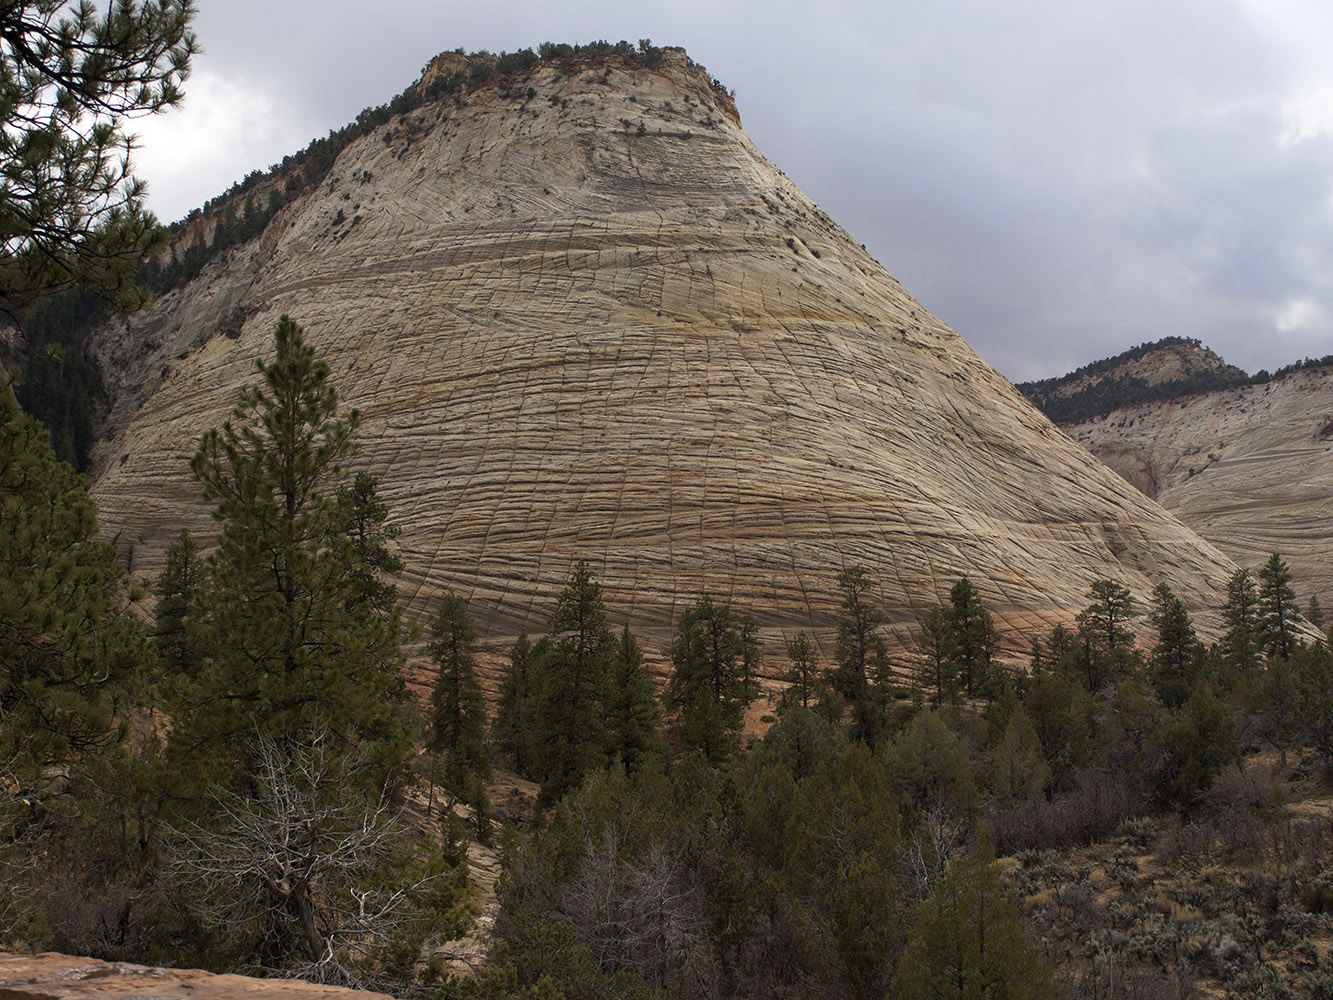 Checkerboard Mesa, crossbedded sandstone layers with vertical fractures,  Zion National Park, Utah.